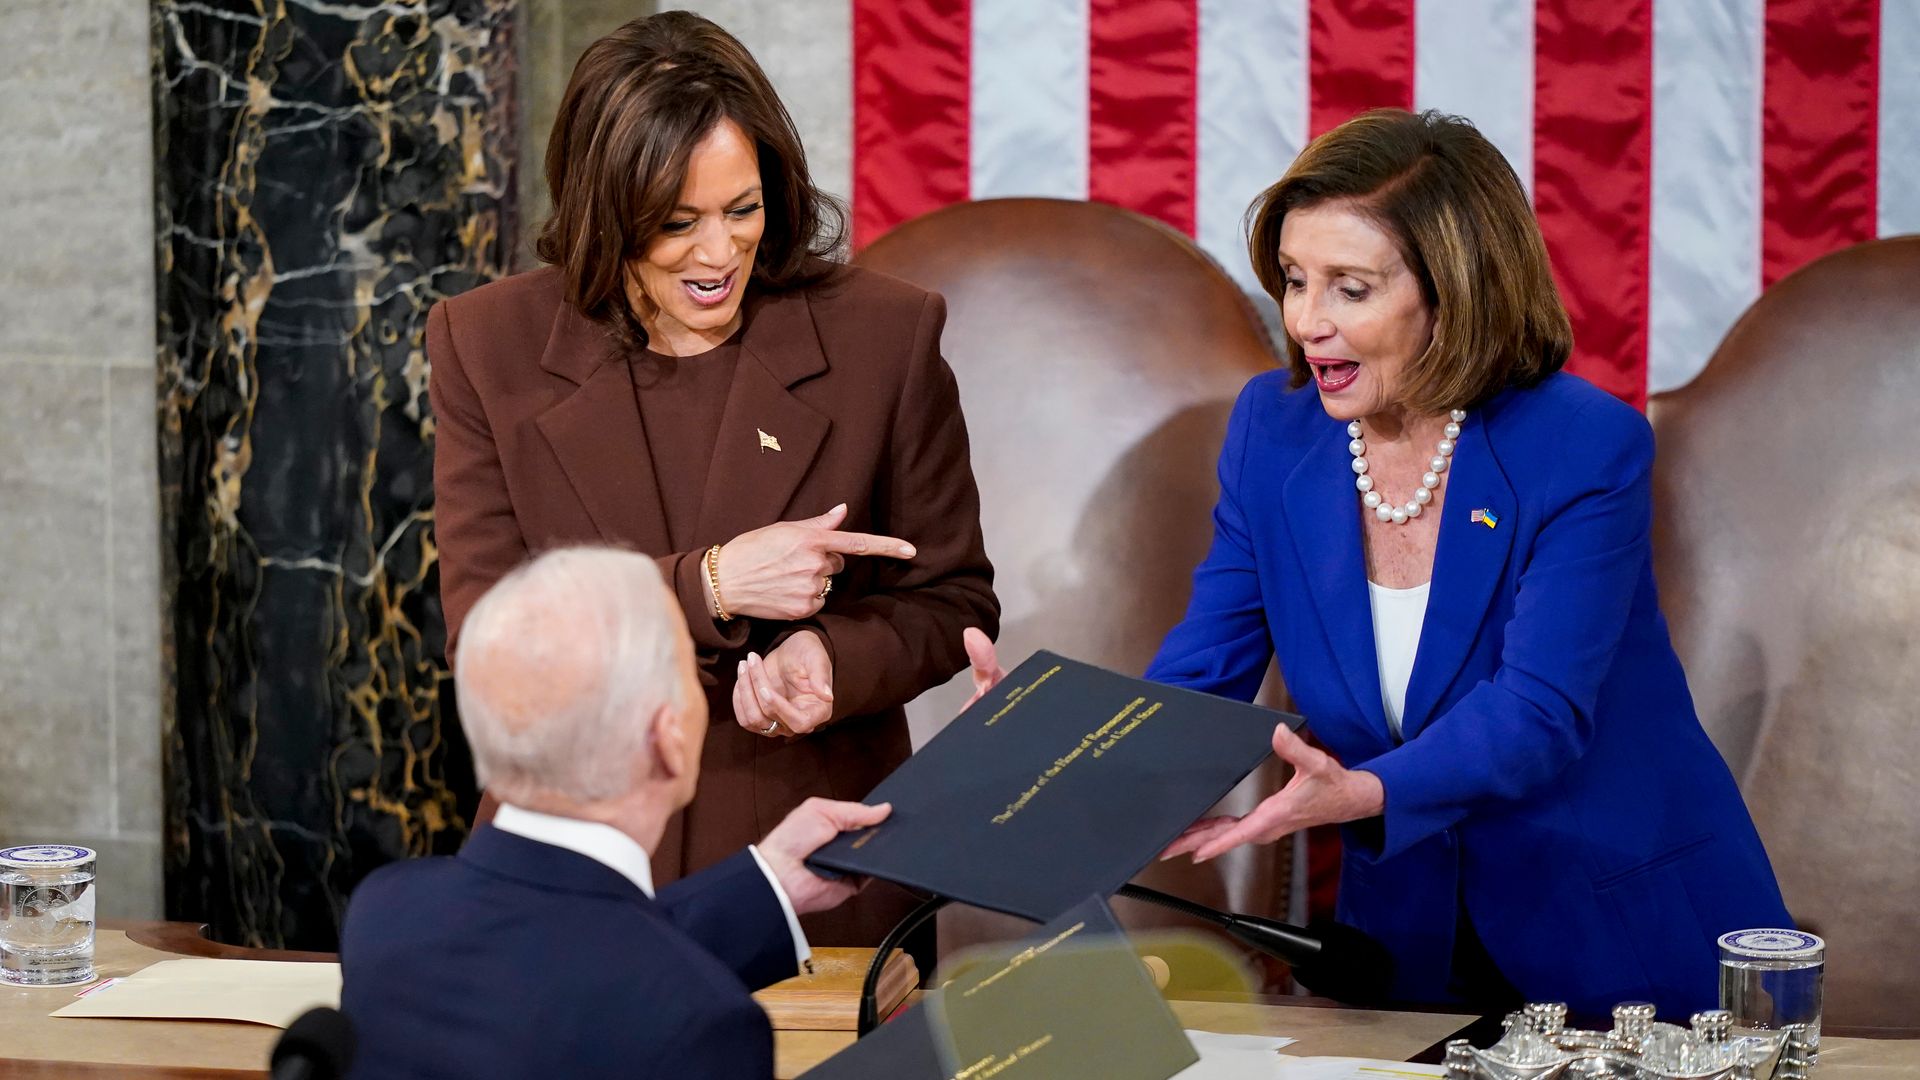 President Biden is seen presenting a copy of his State of the Union address to House Speaker Nancy Pelosi.